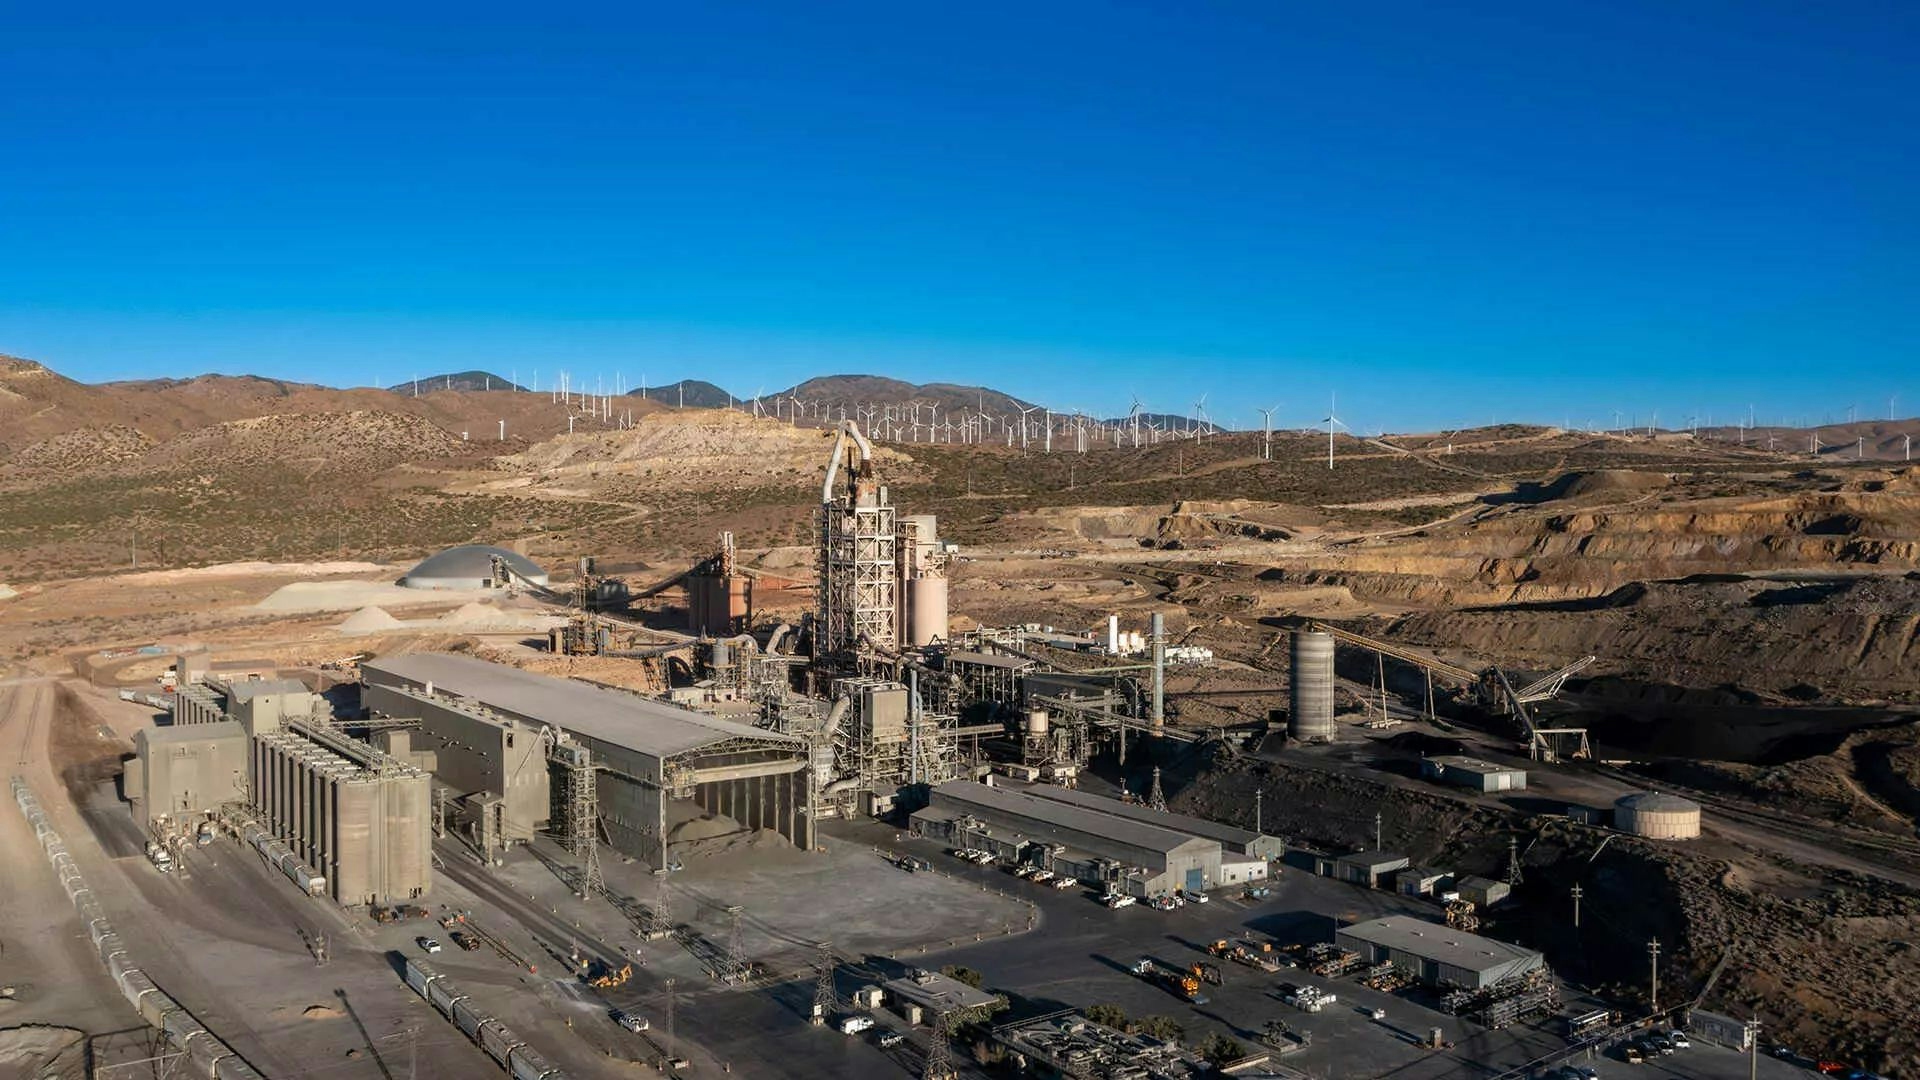 New OK™ raw mill increases productivity and efficiency at CalPortland's Mojave plant